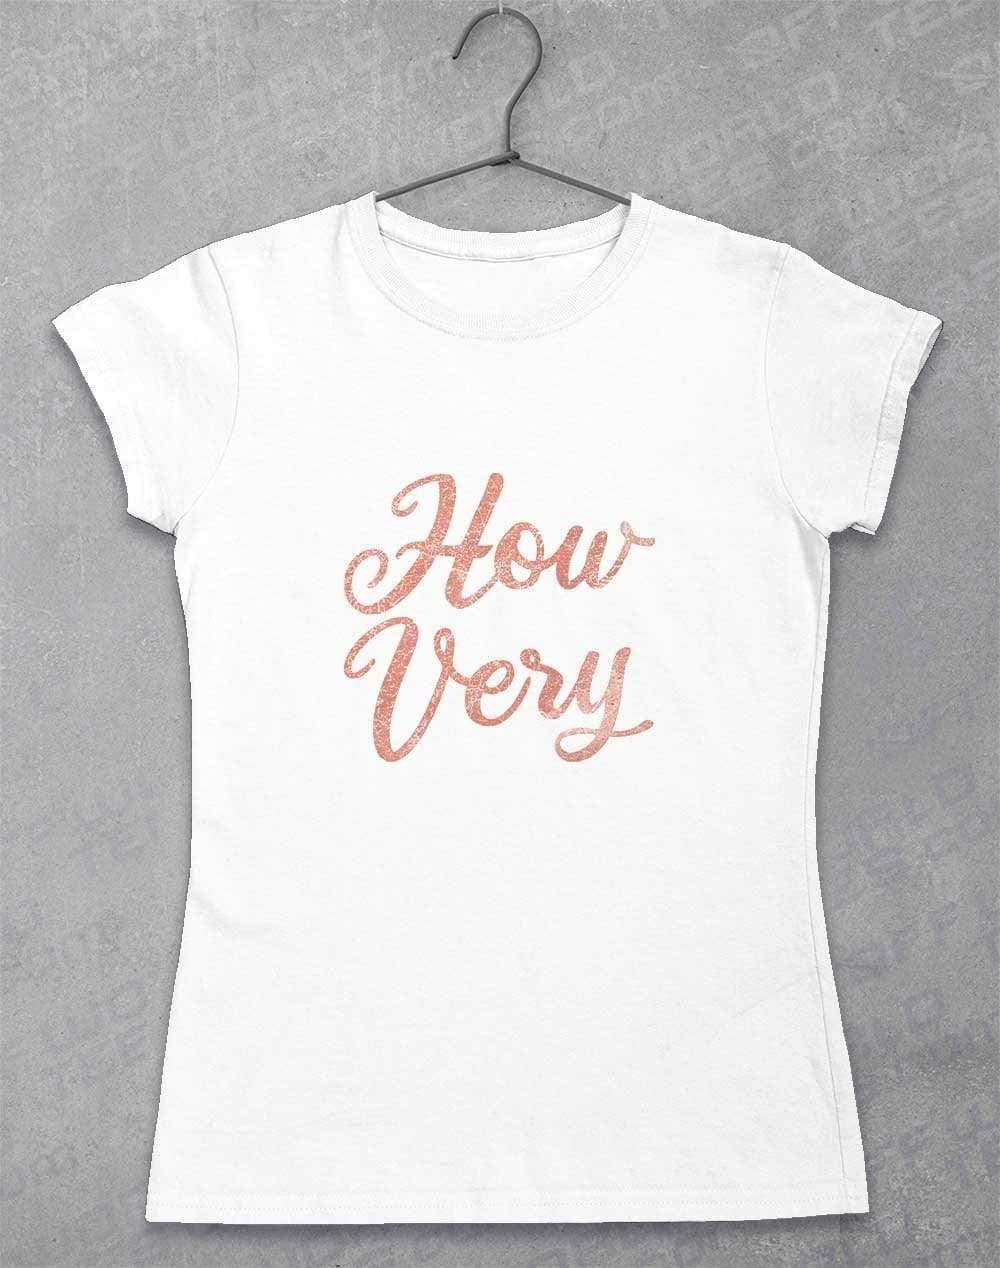 How Very Womens T-Shirt 8-10 / White  - Off World Tees